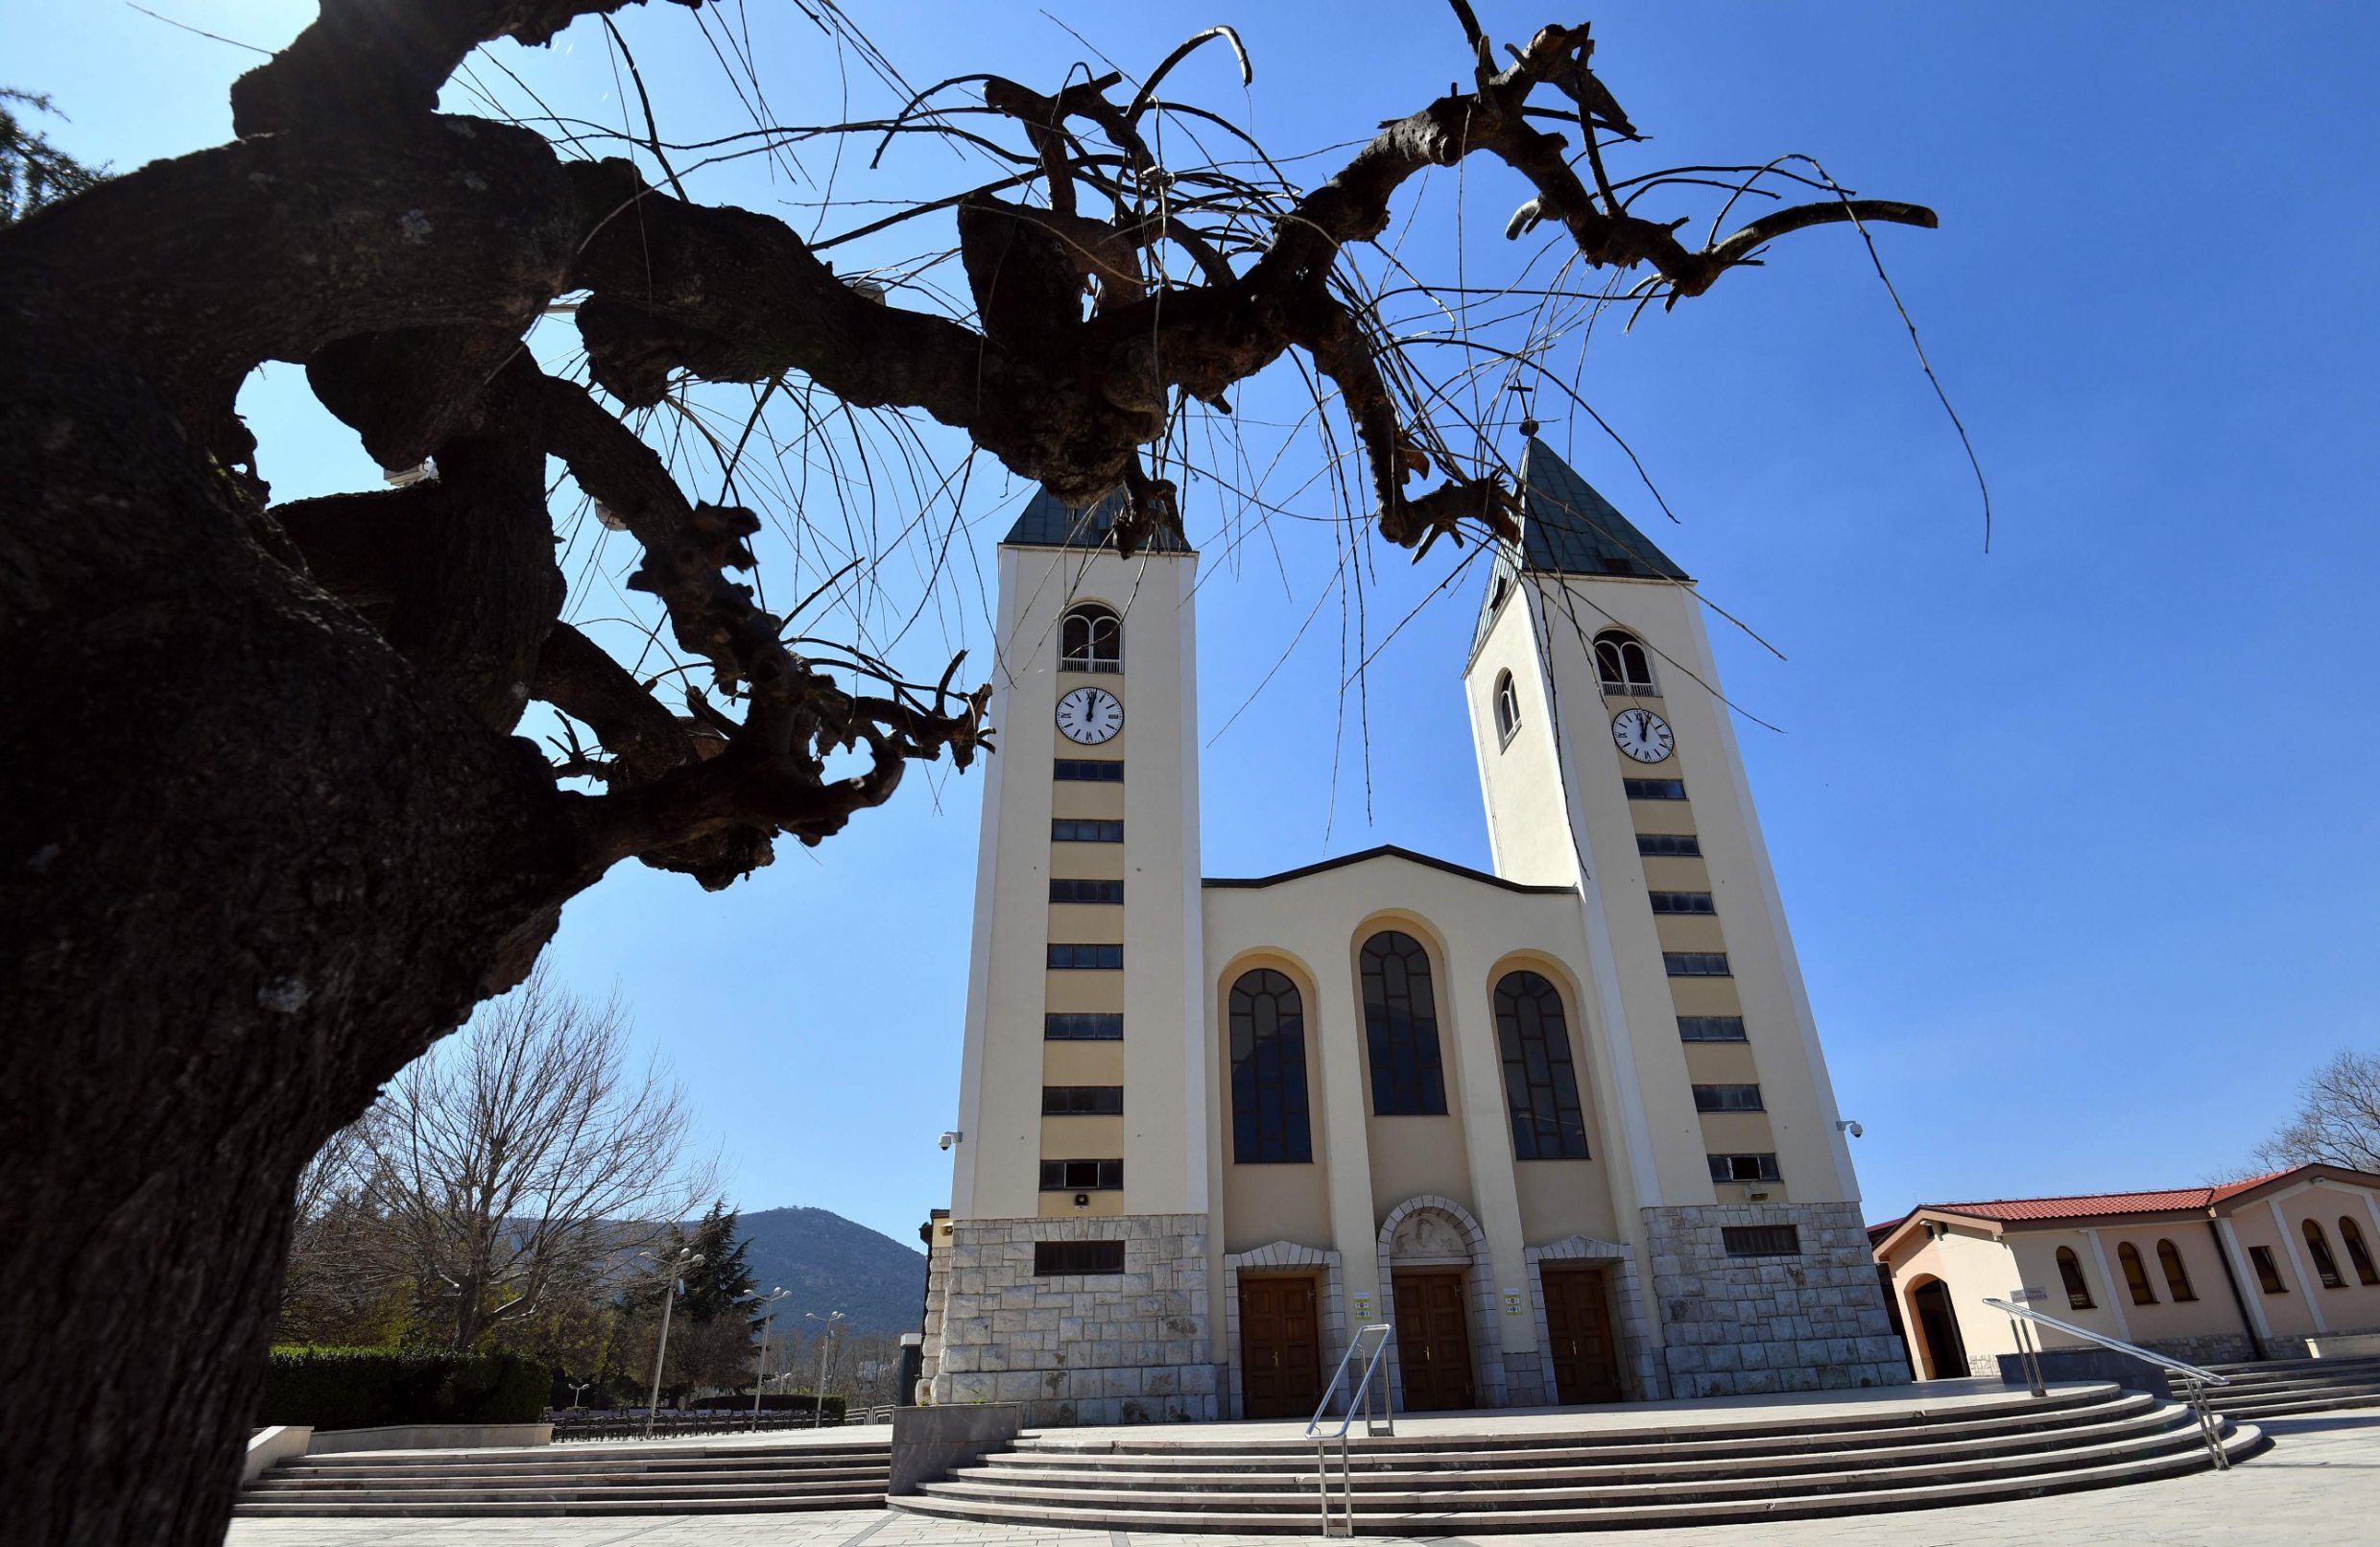 General view of the empty main square in front of St Jacob church, usually riddled with thousands of Catholic believers, at Marian pilgrimage site, in the southern Bosnian town of Medjugorje, on April 7, 2020 during a lockdown to stop the spread of COVID-19 (novel coronavirus). - Ever since the Virgin Mary was said to appear before six teenagers on a hill in Bosnia four decades ago, pilgrims have flocked to the town of Medjugorje, eager to witness a miracle. (Photo by ELVIS BARUKCIC / AFP)